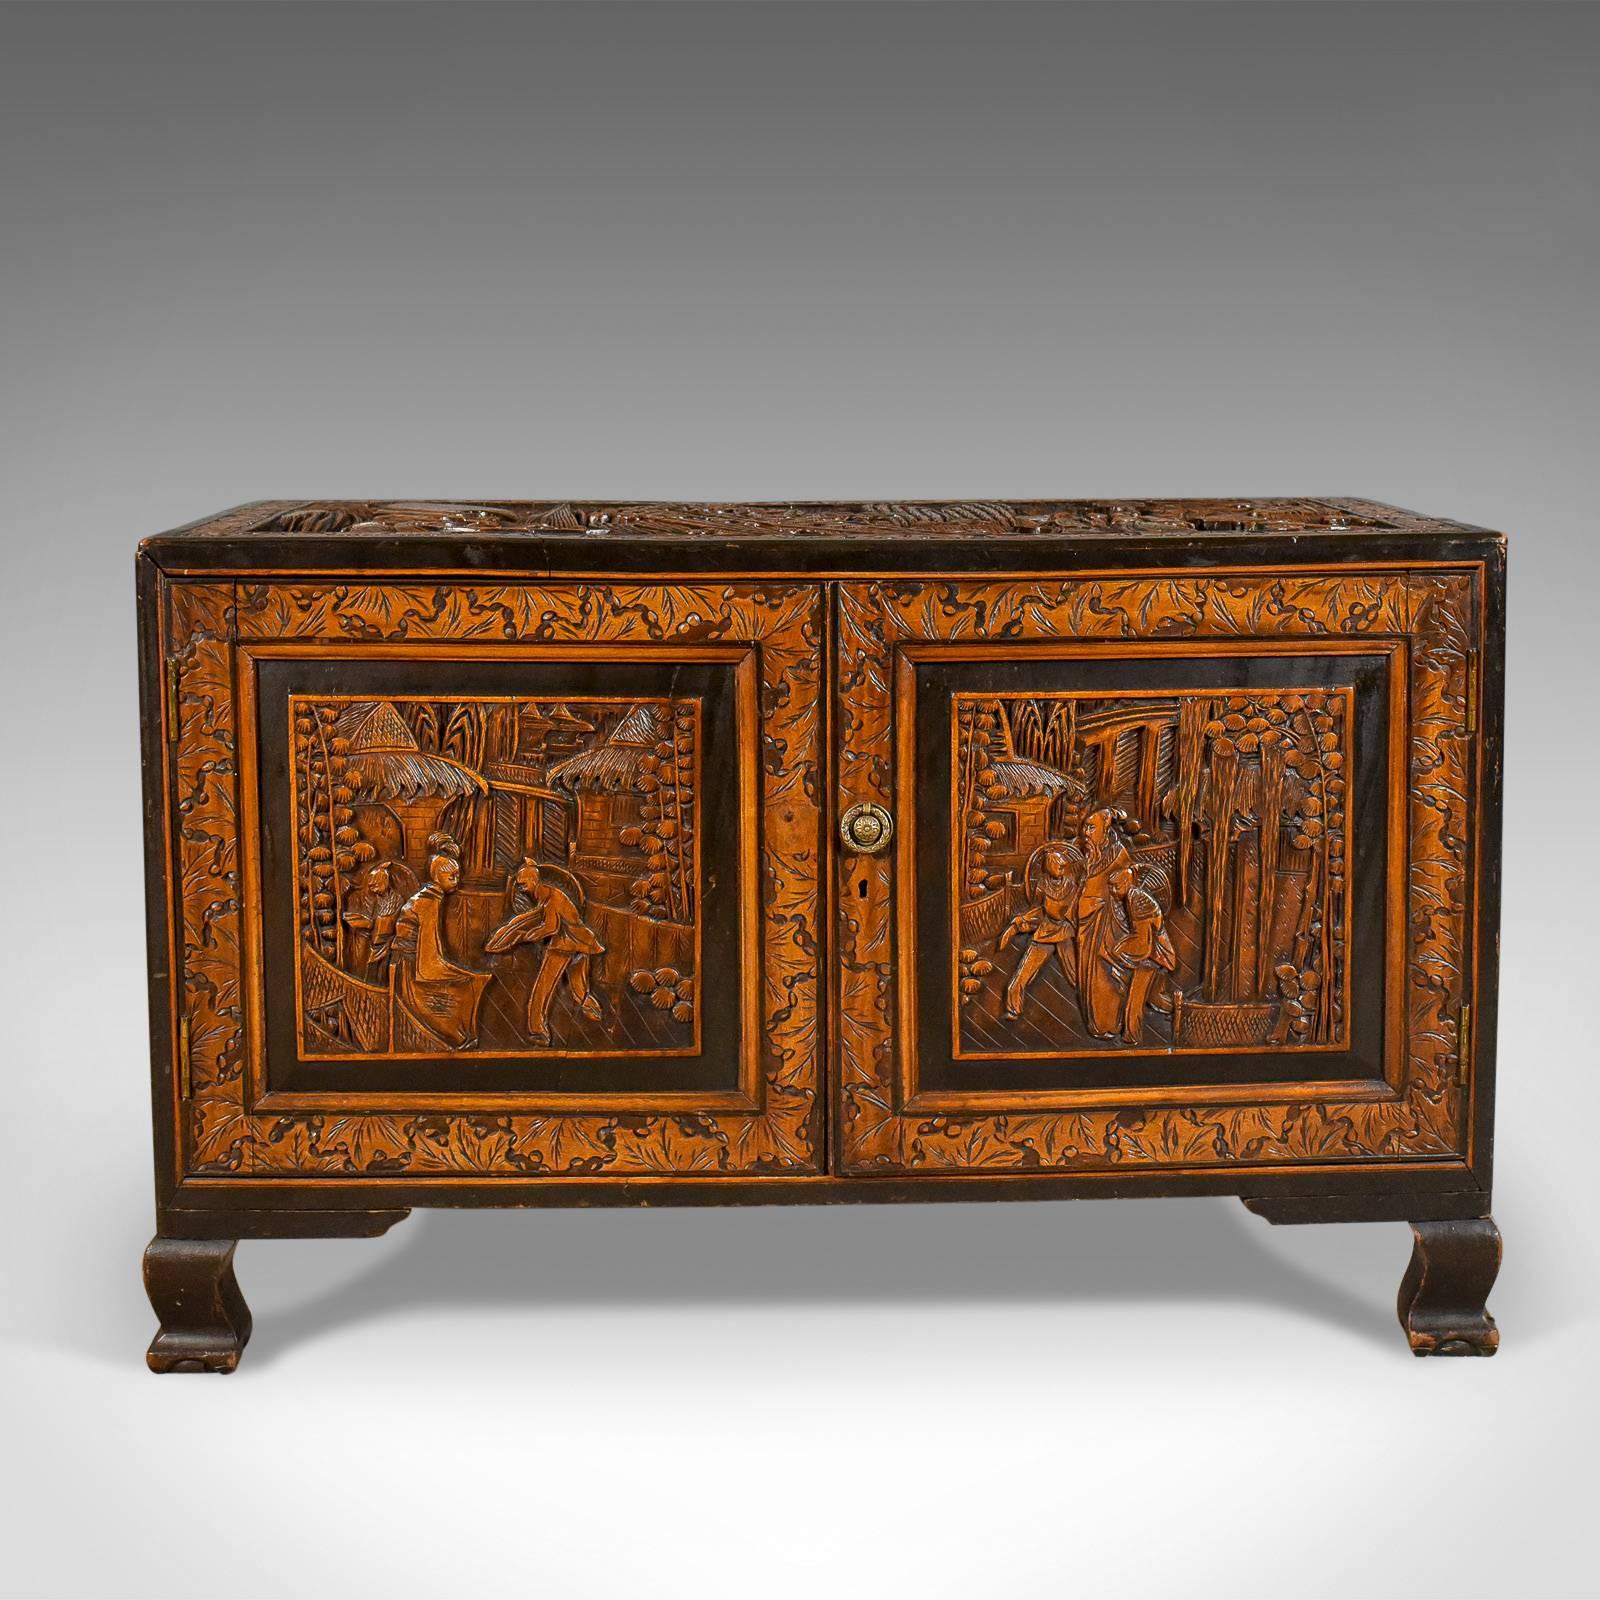 This is an early 20th century camphor wood chest with oriental carved scenes. A trunk dating to circa 1930.

Fabulously decorated with profusely carved panels
Delineated with ebonised frames and bands
Standing upon a shaped apron and squat